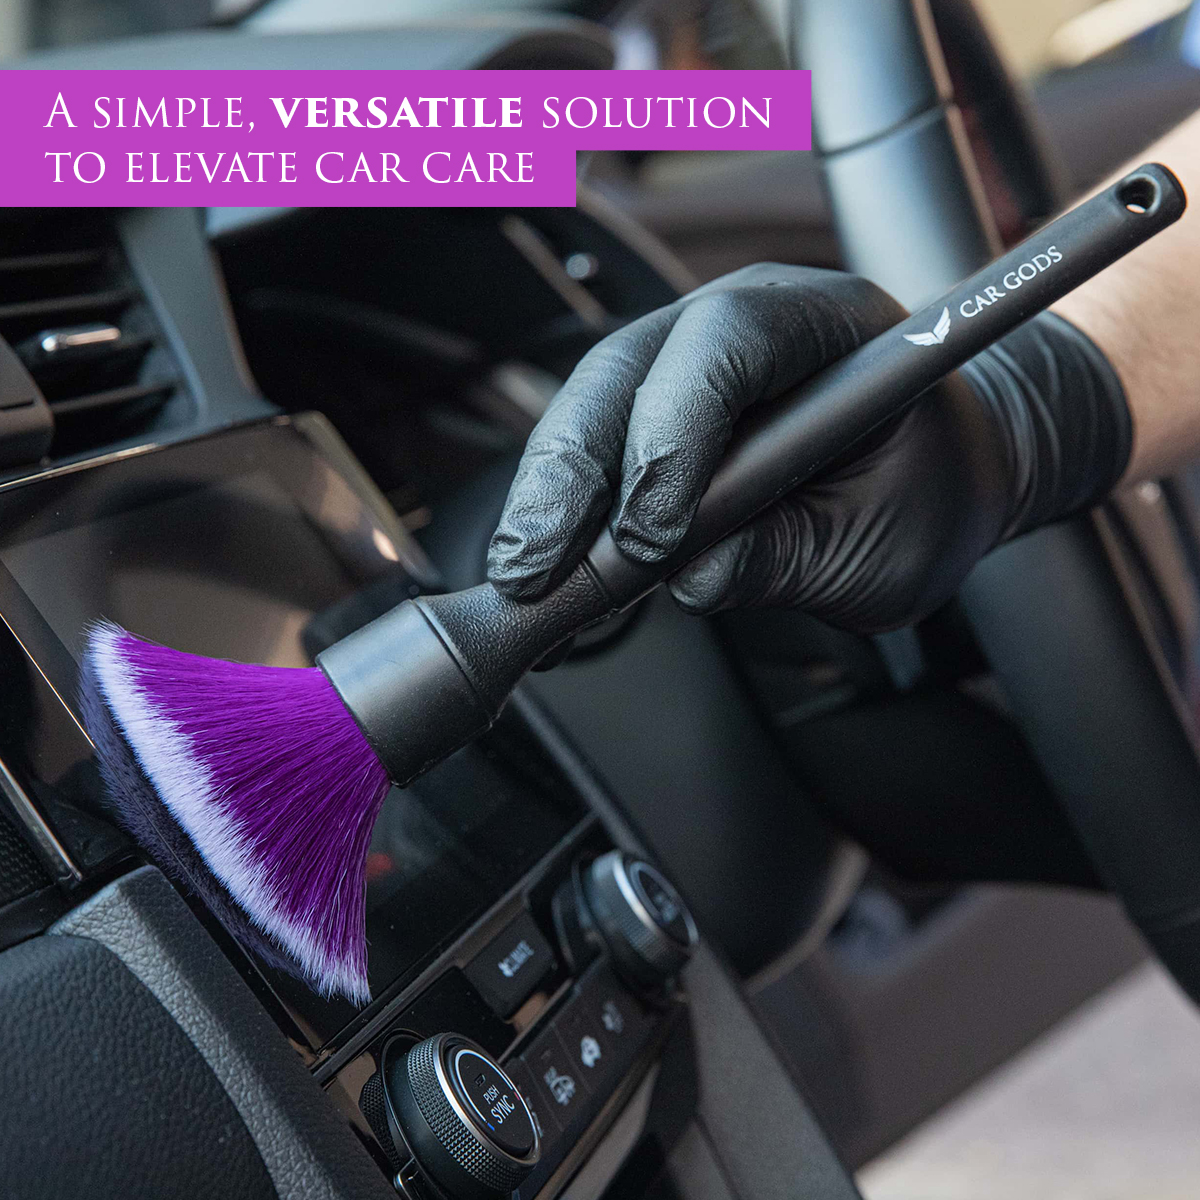 Elevate your car care with a simple, versatile solution: Car Gods Feathertip Detailing Brushes.